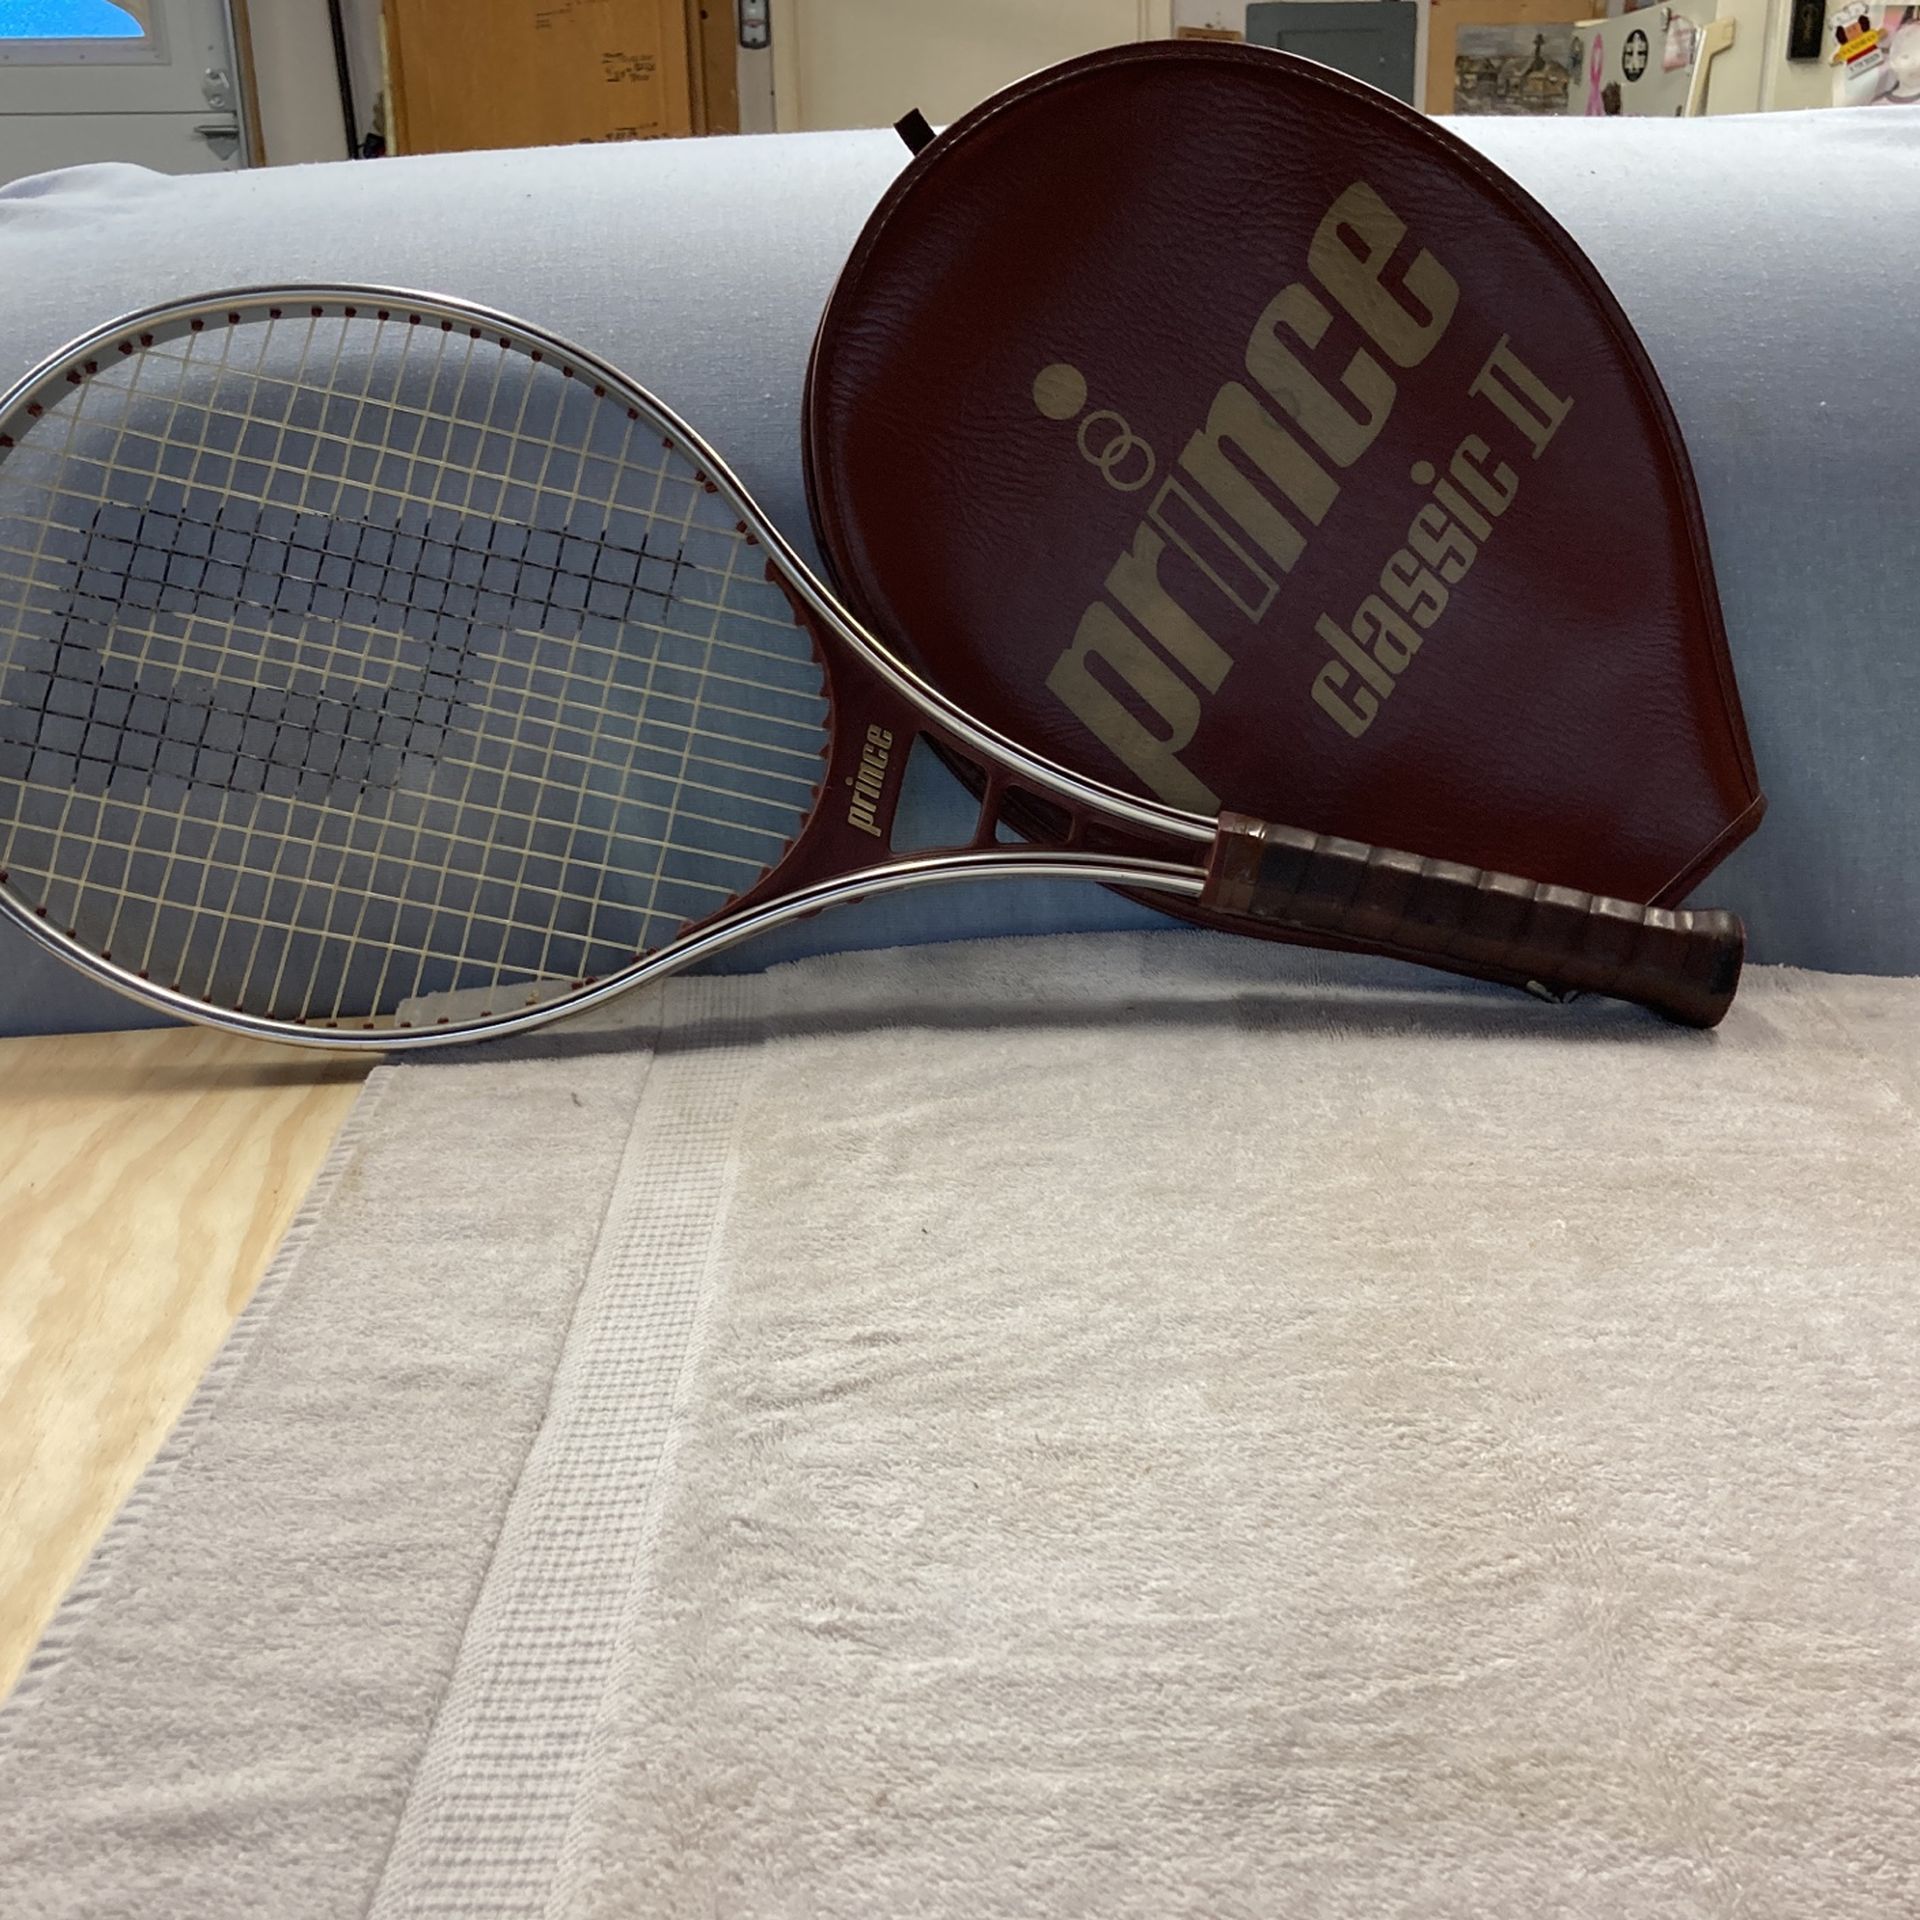 Prince Classic II Tennis Racket With cover Vintage Aluminum  Condition Used But Like New Or Best Offer